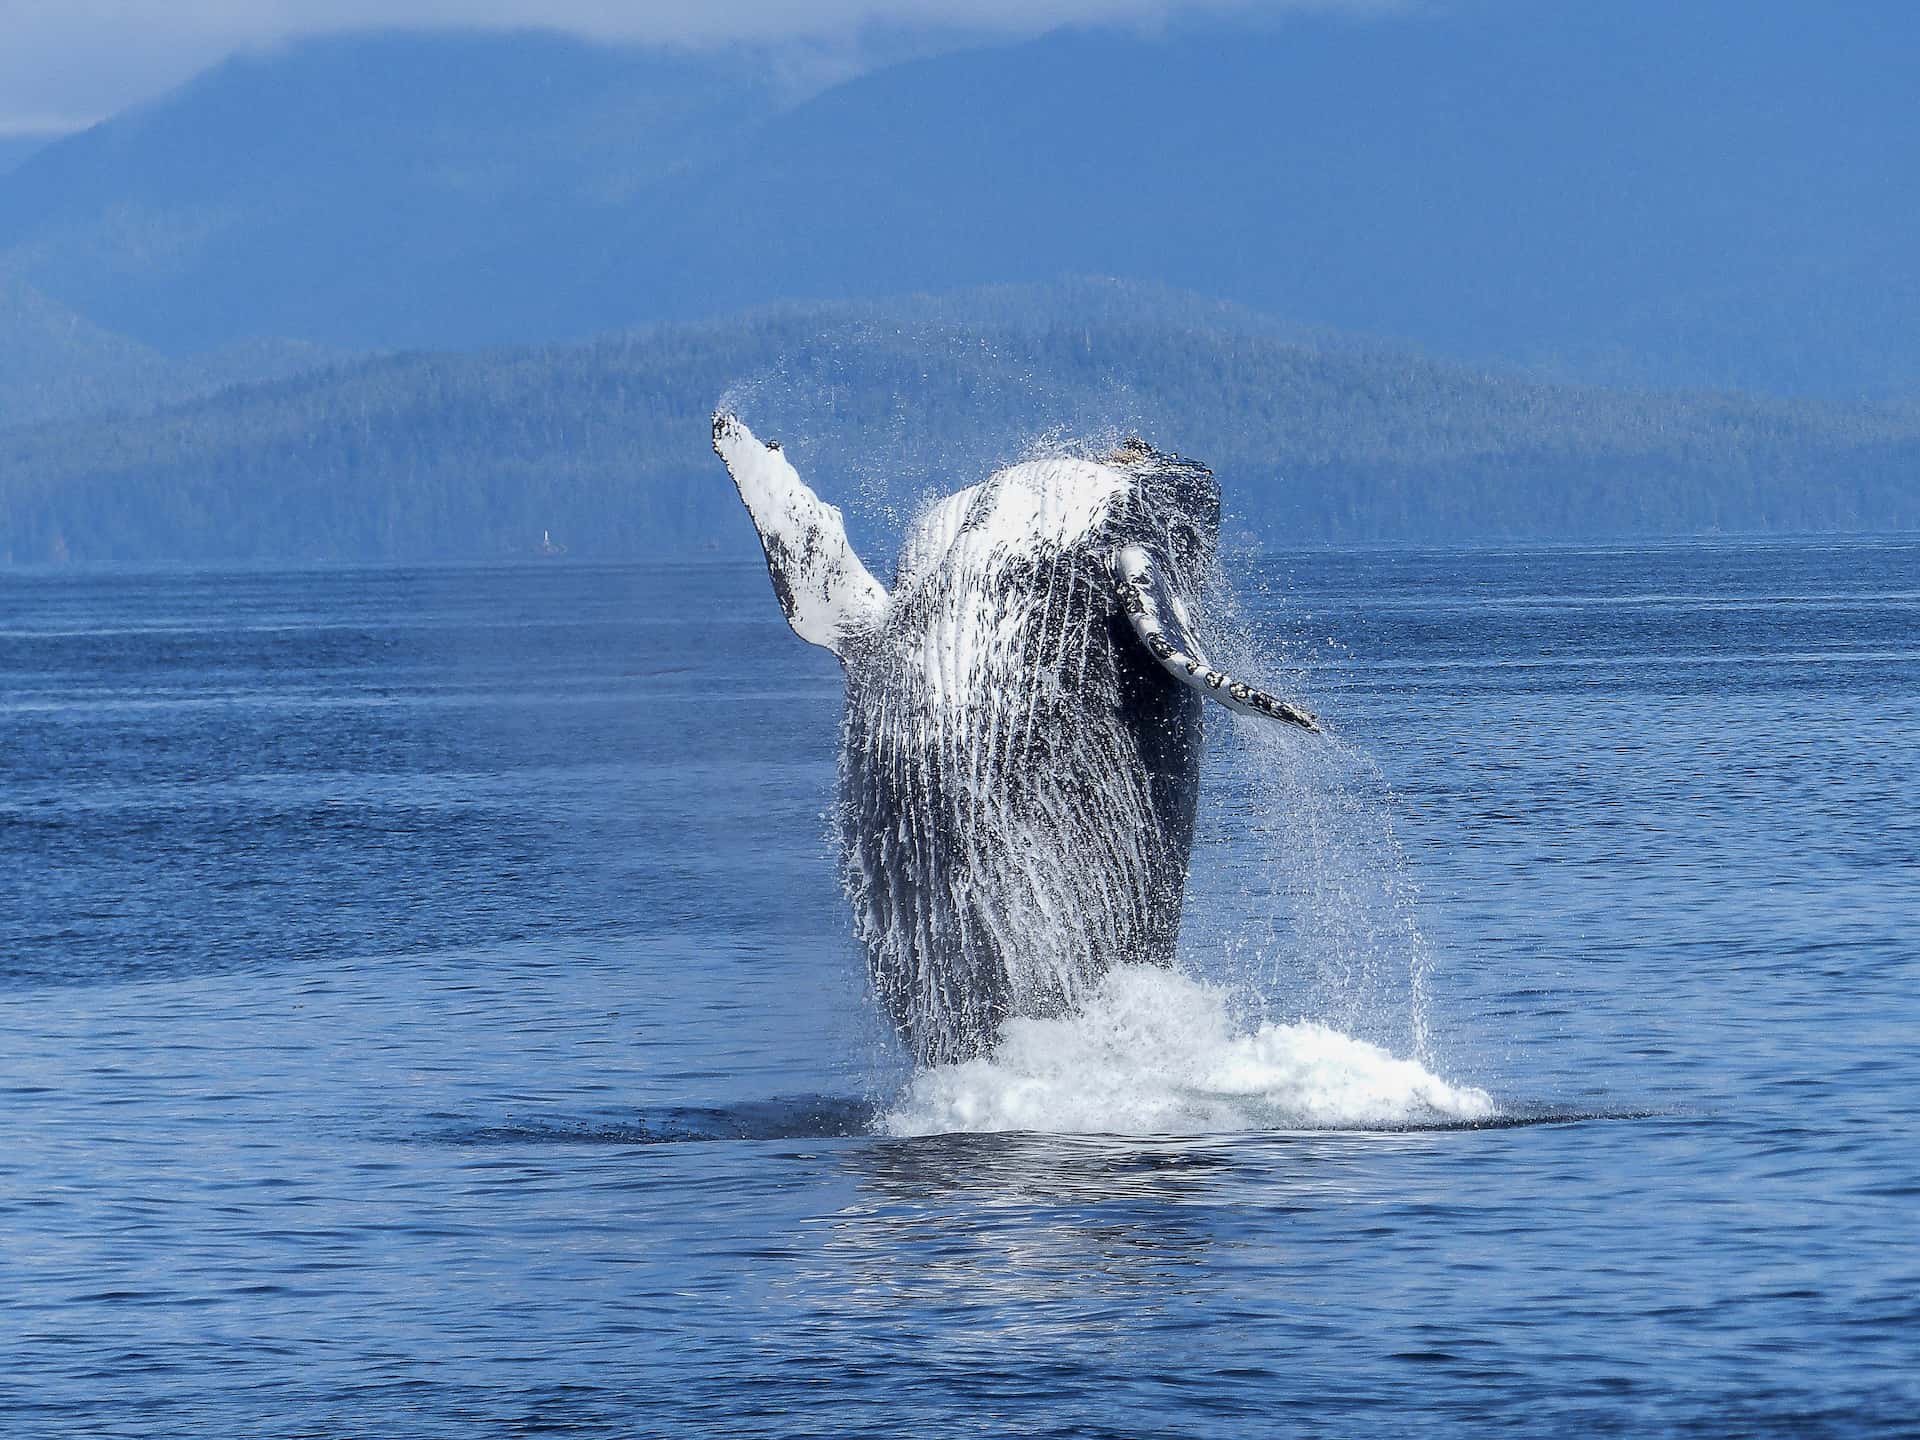 Big, beautiful blue whale doing a slight back-flip out of the water. Hazy hills of what looks like pine trees behind it.